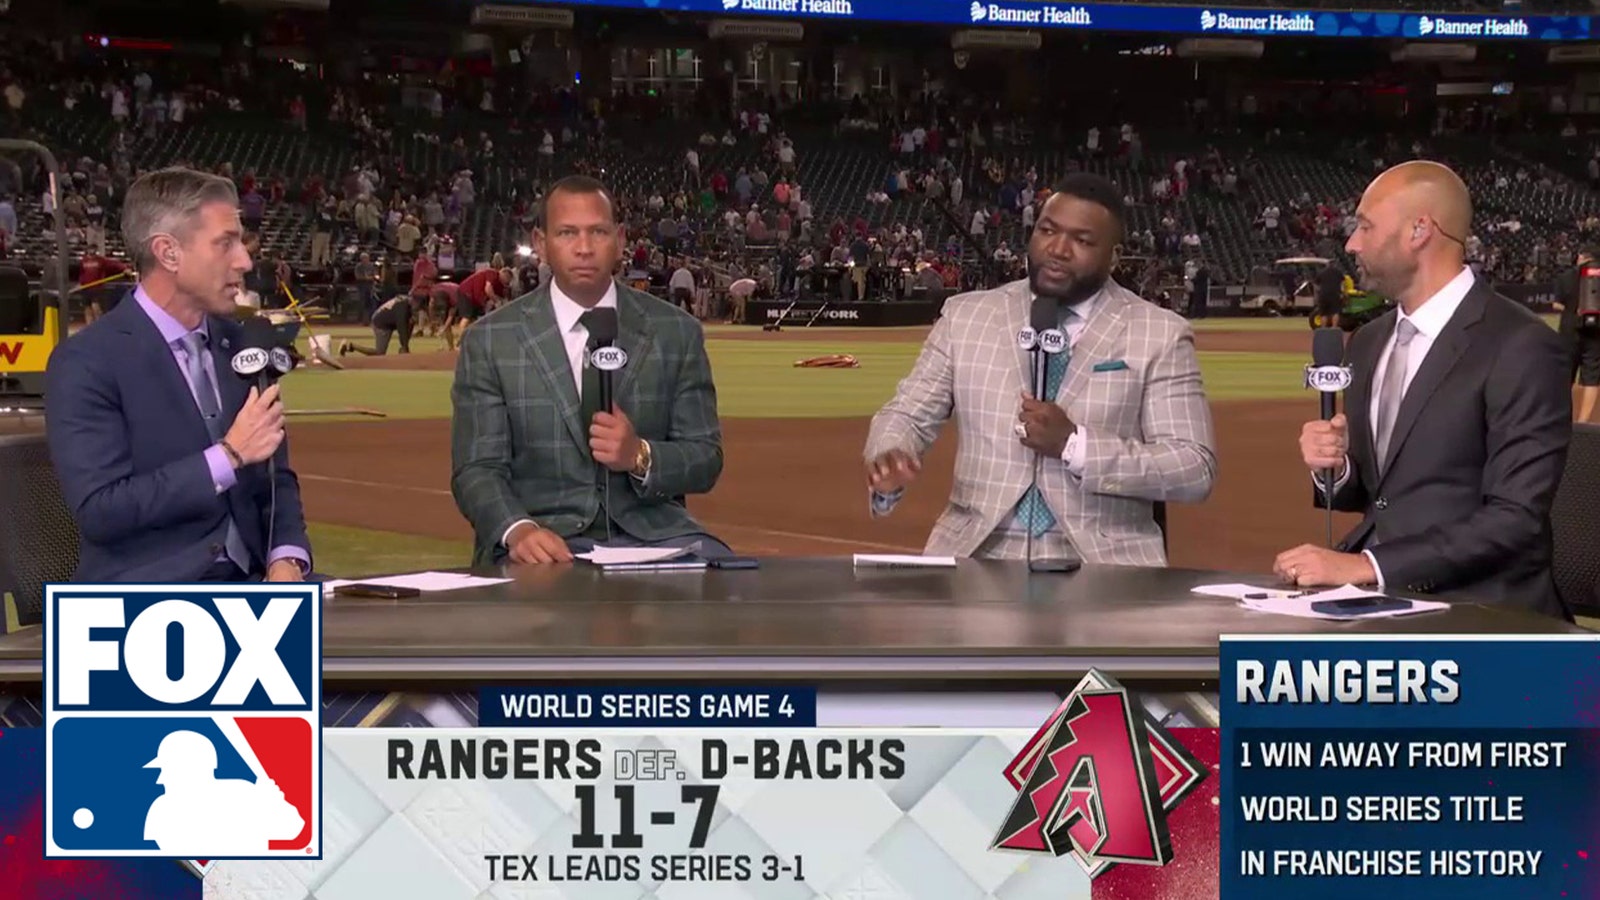 Rangers beat D-backs in Game 4: Jeter, Big Papi and A-Rod react